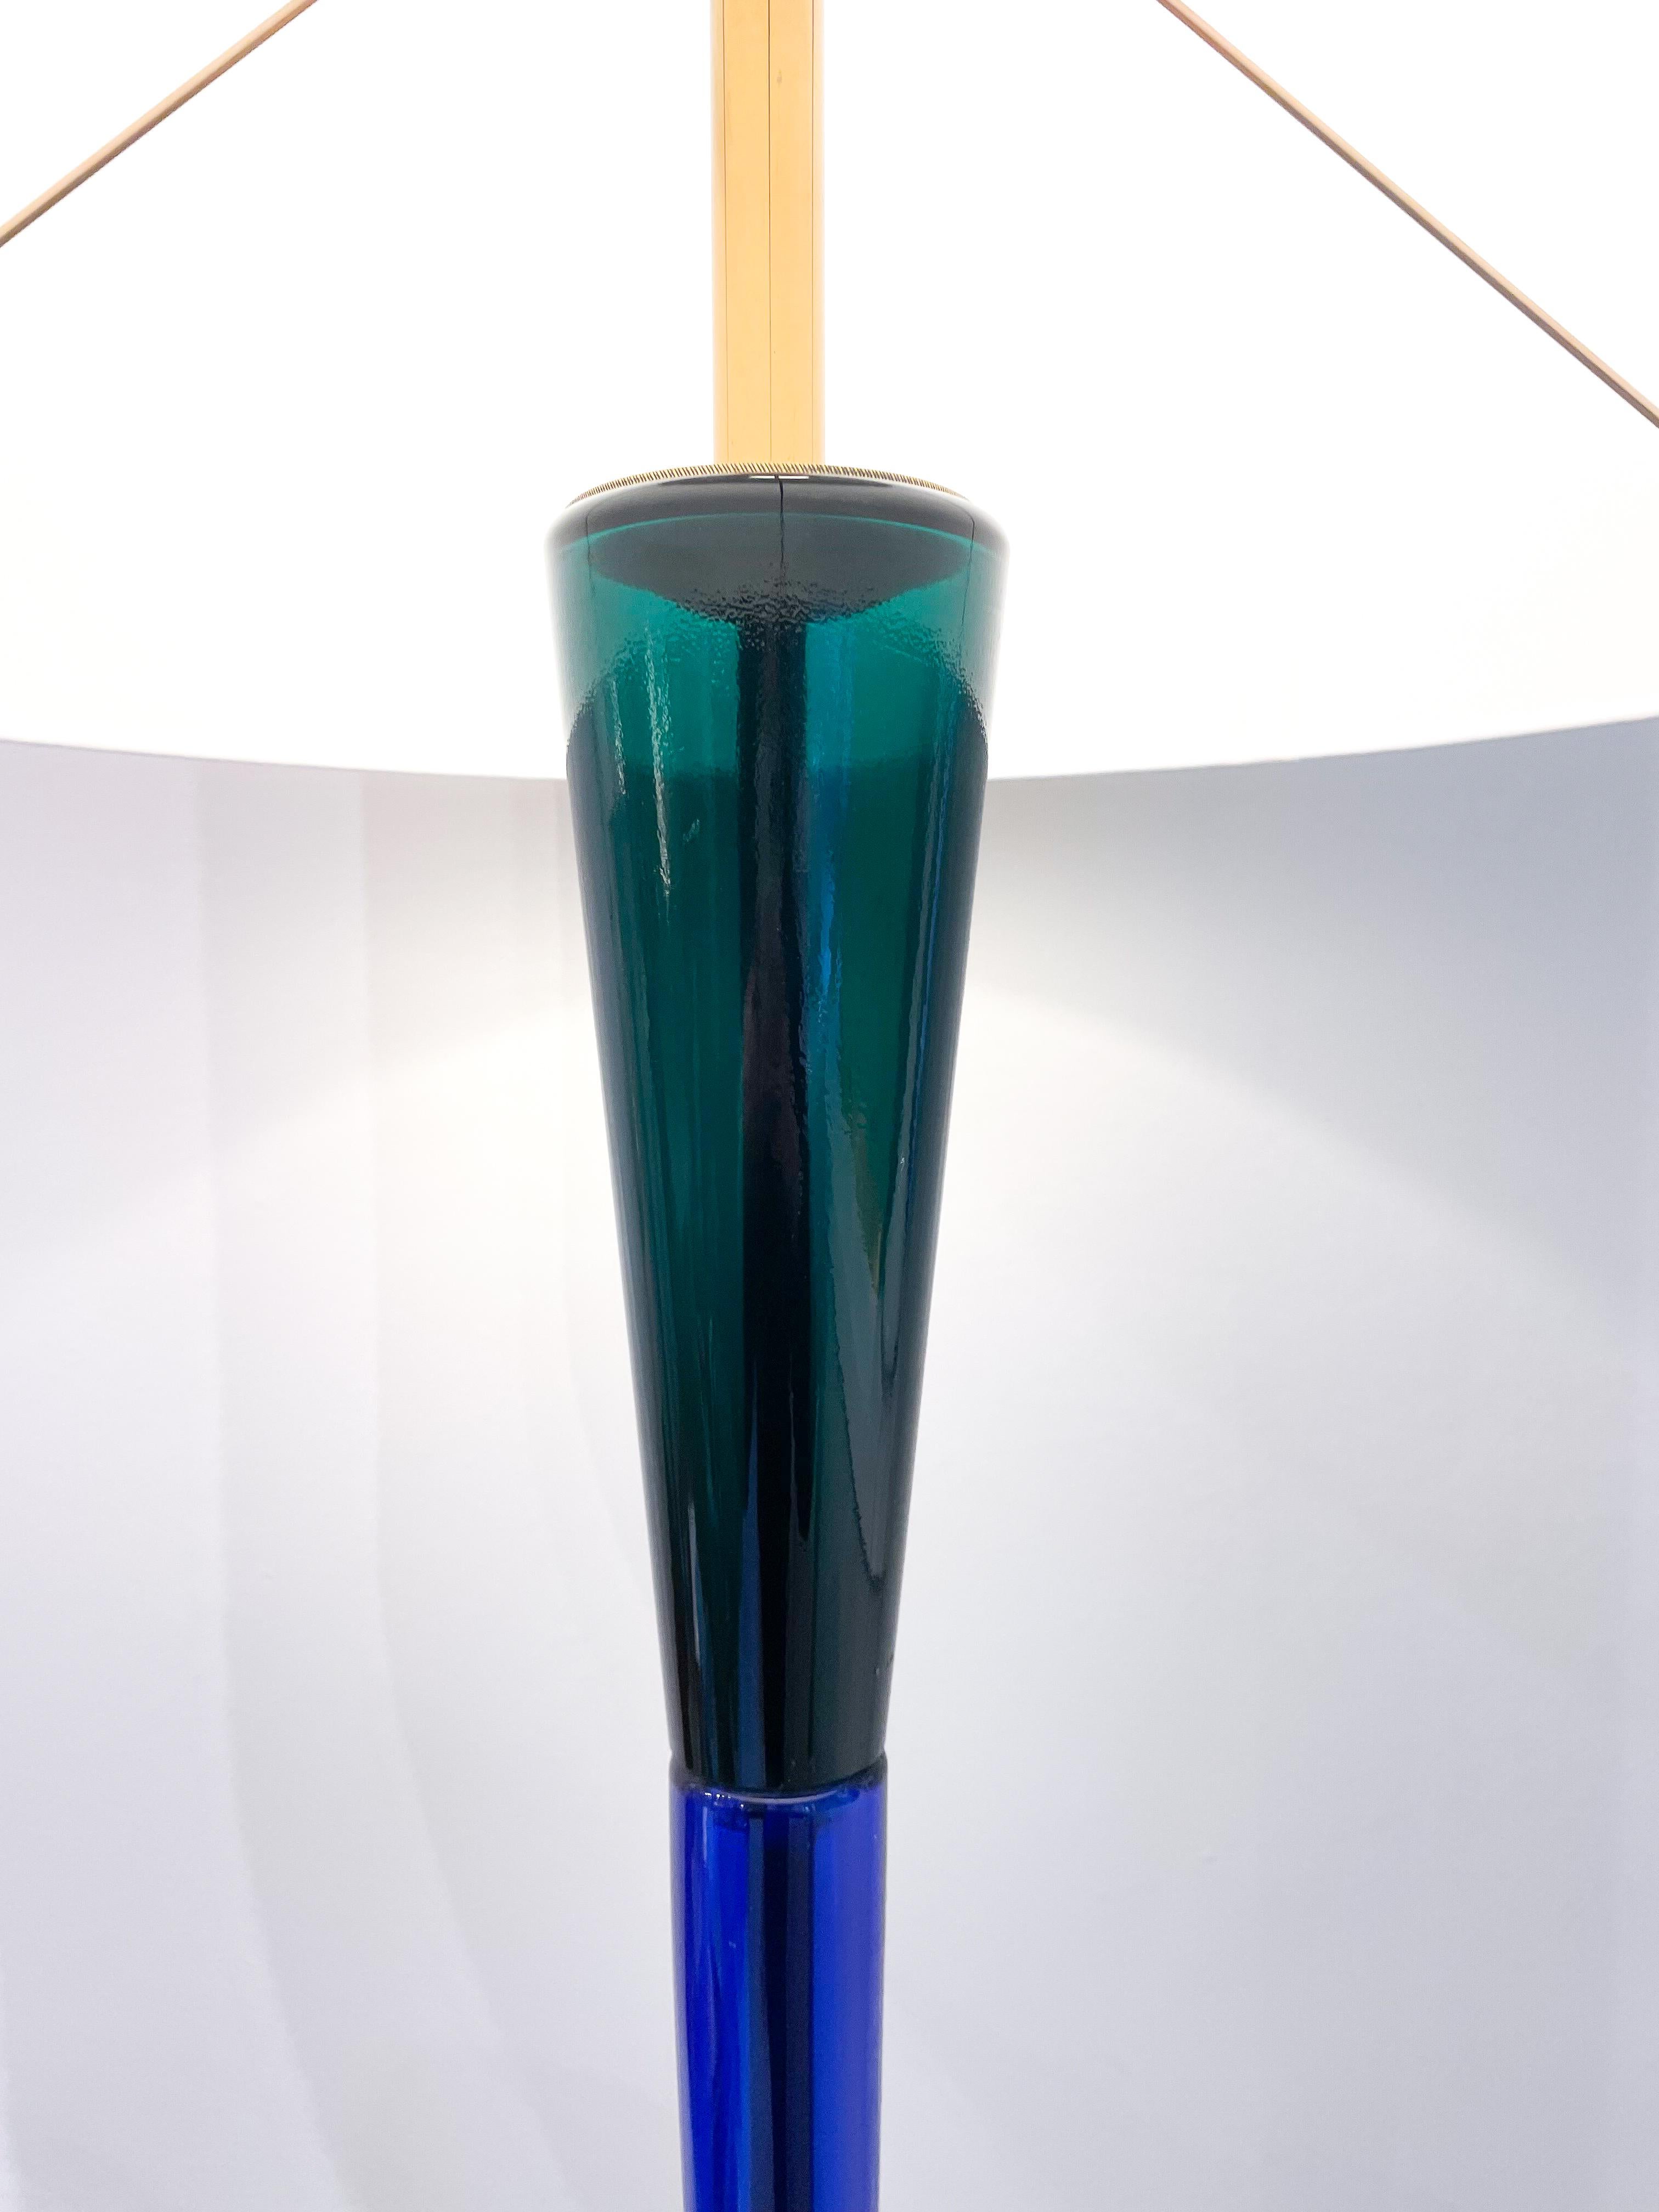 Mid-20th Century Mid-Century Blue and Green Murano Glass Floor lamp by Fulvio Bianconi, 1950s For Sale